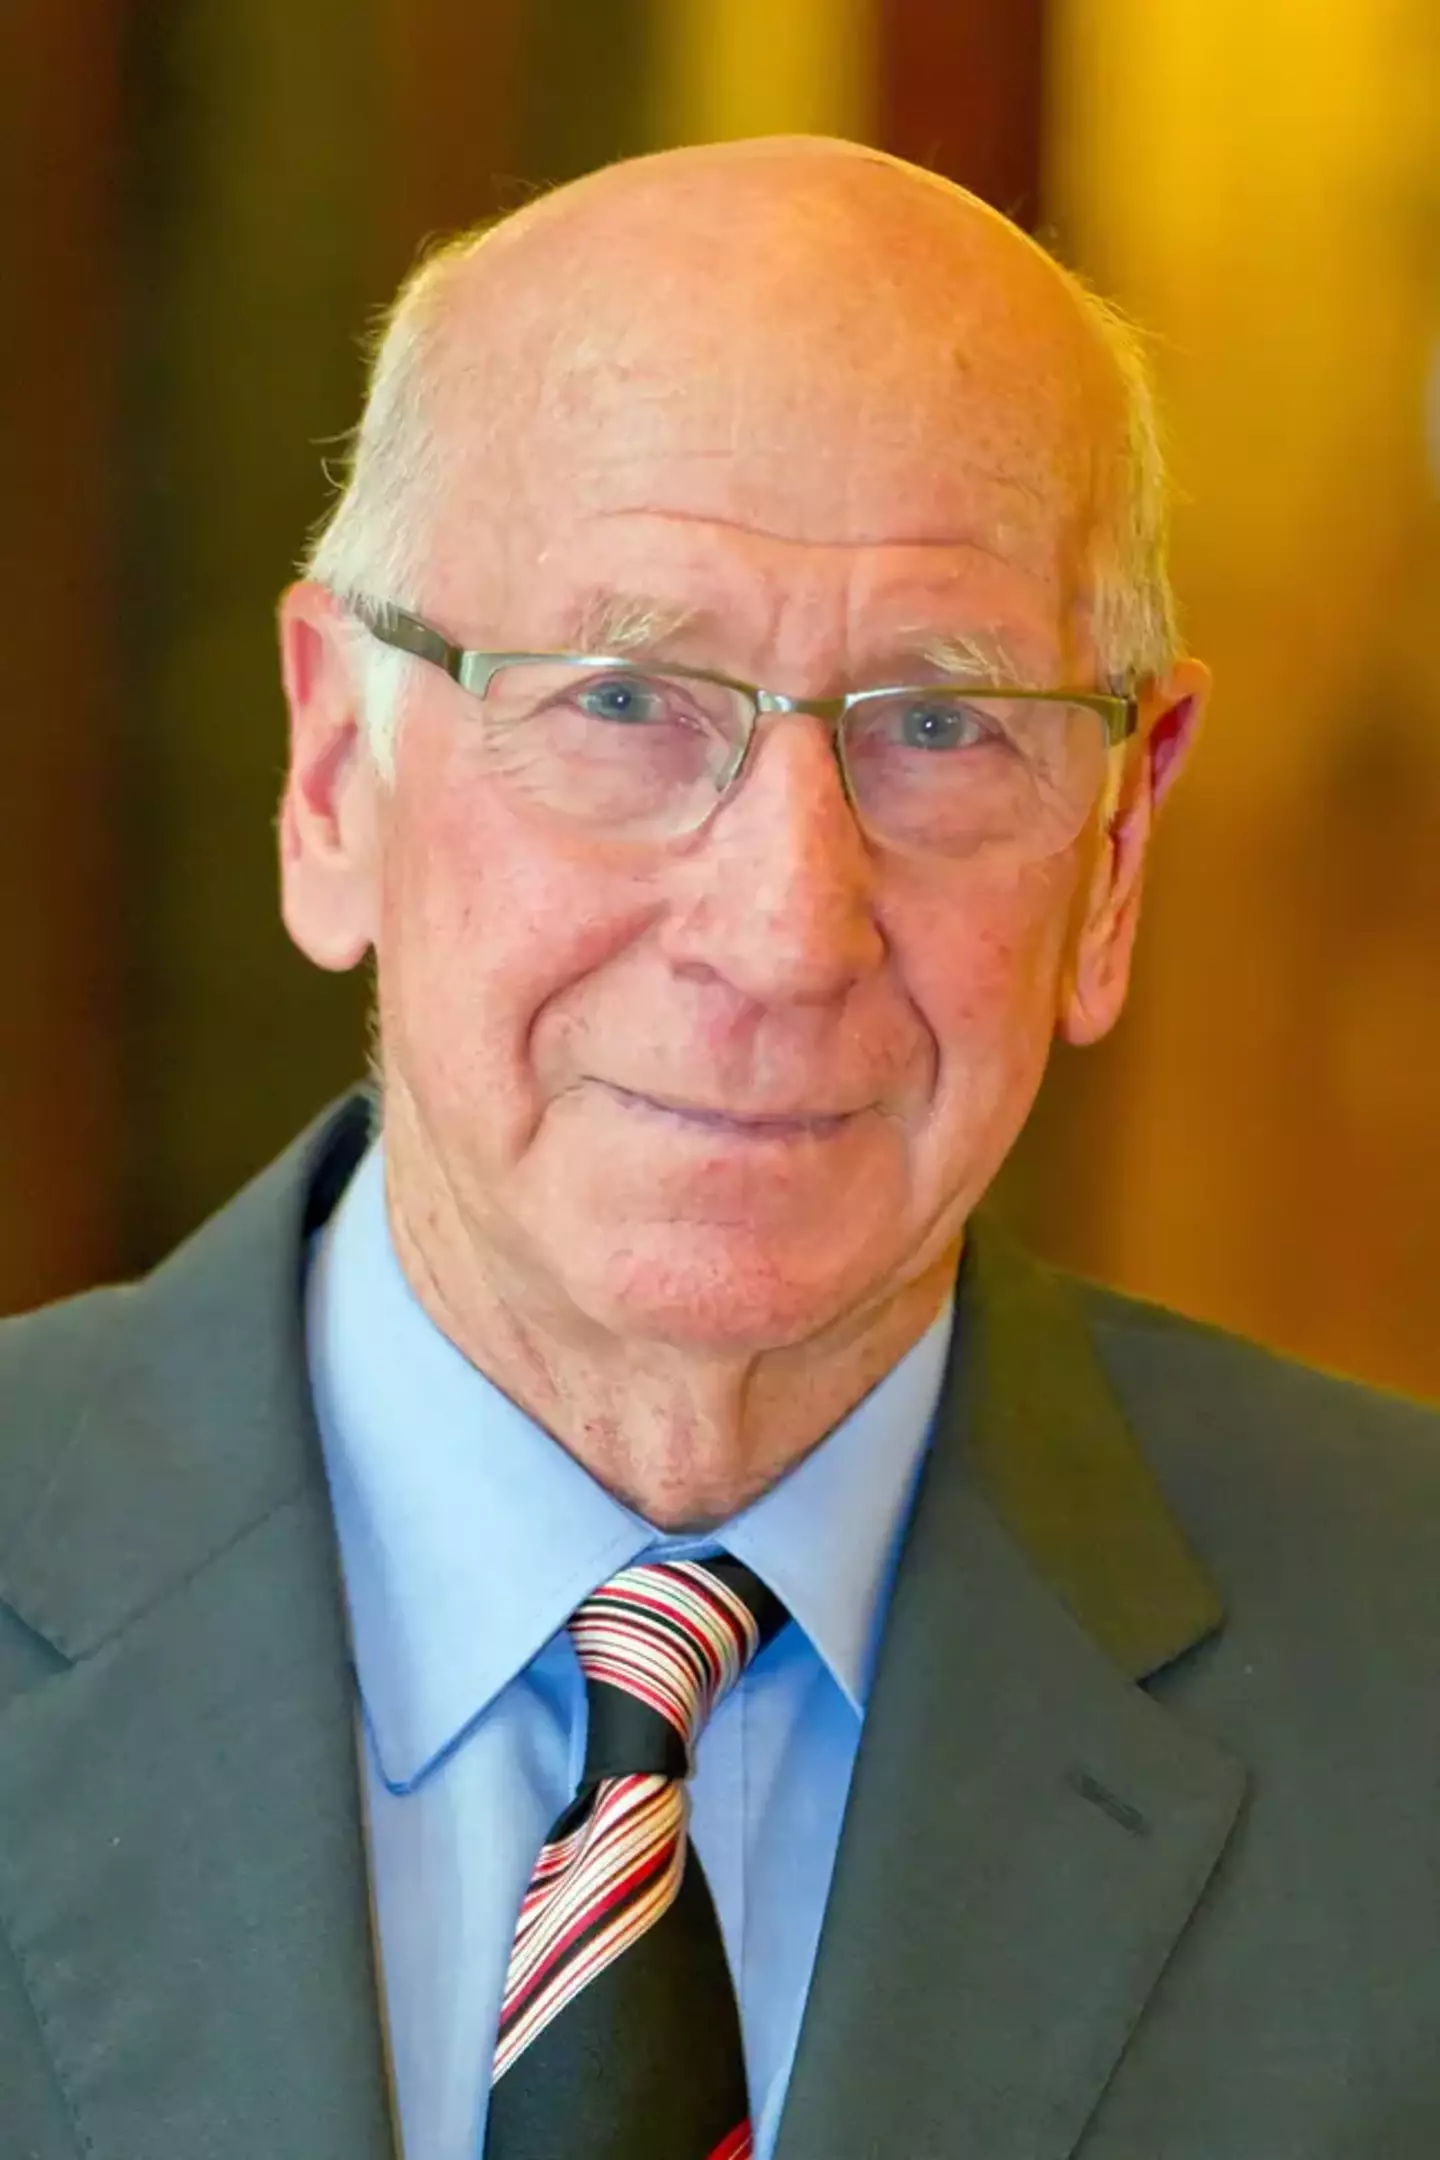 Sir Bobby Charlton was diagnosed with dementia last year.